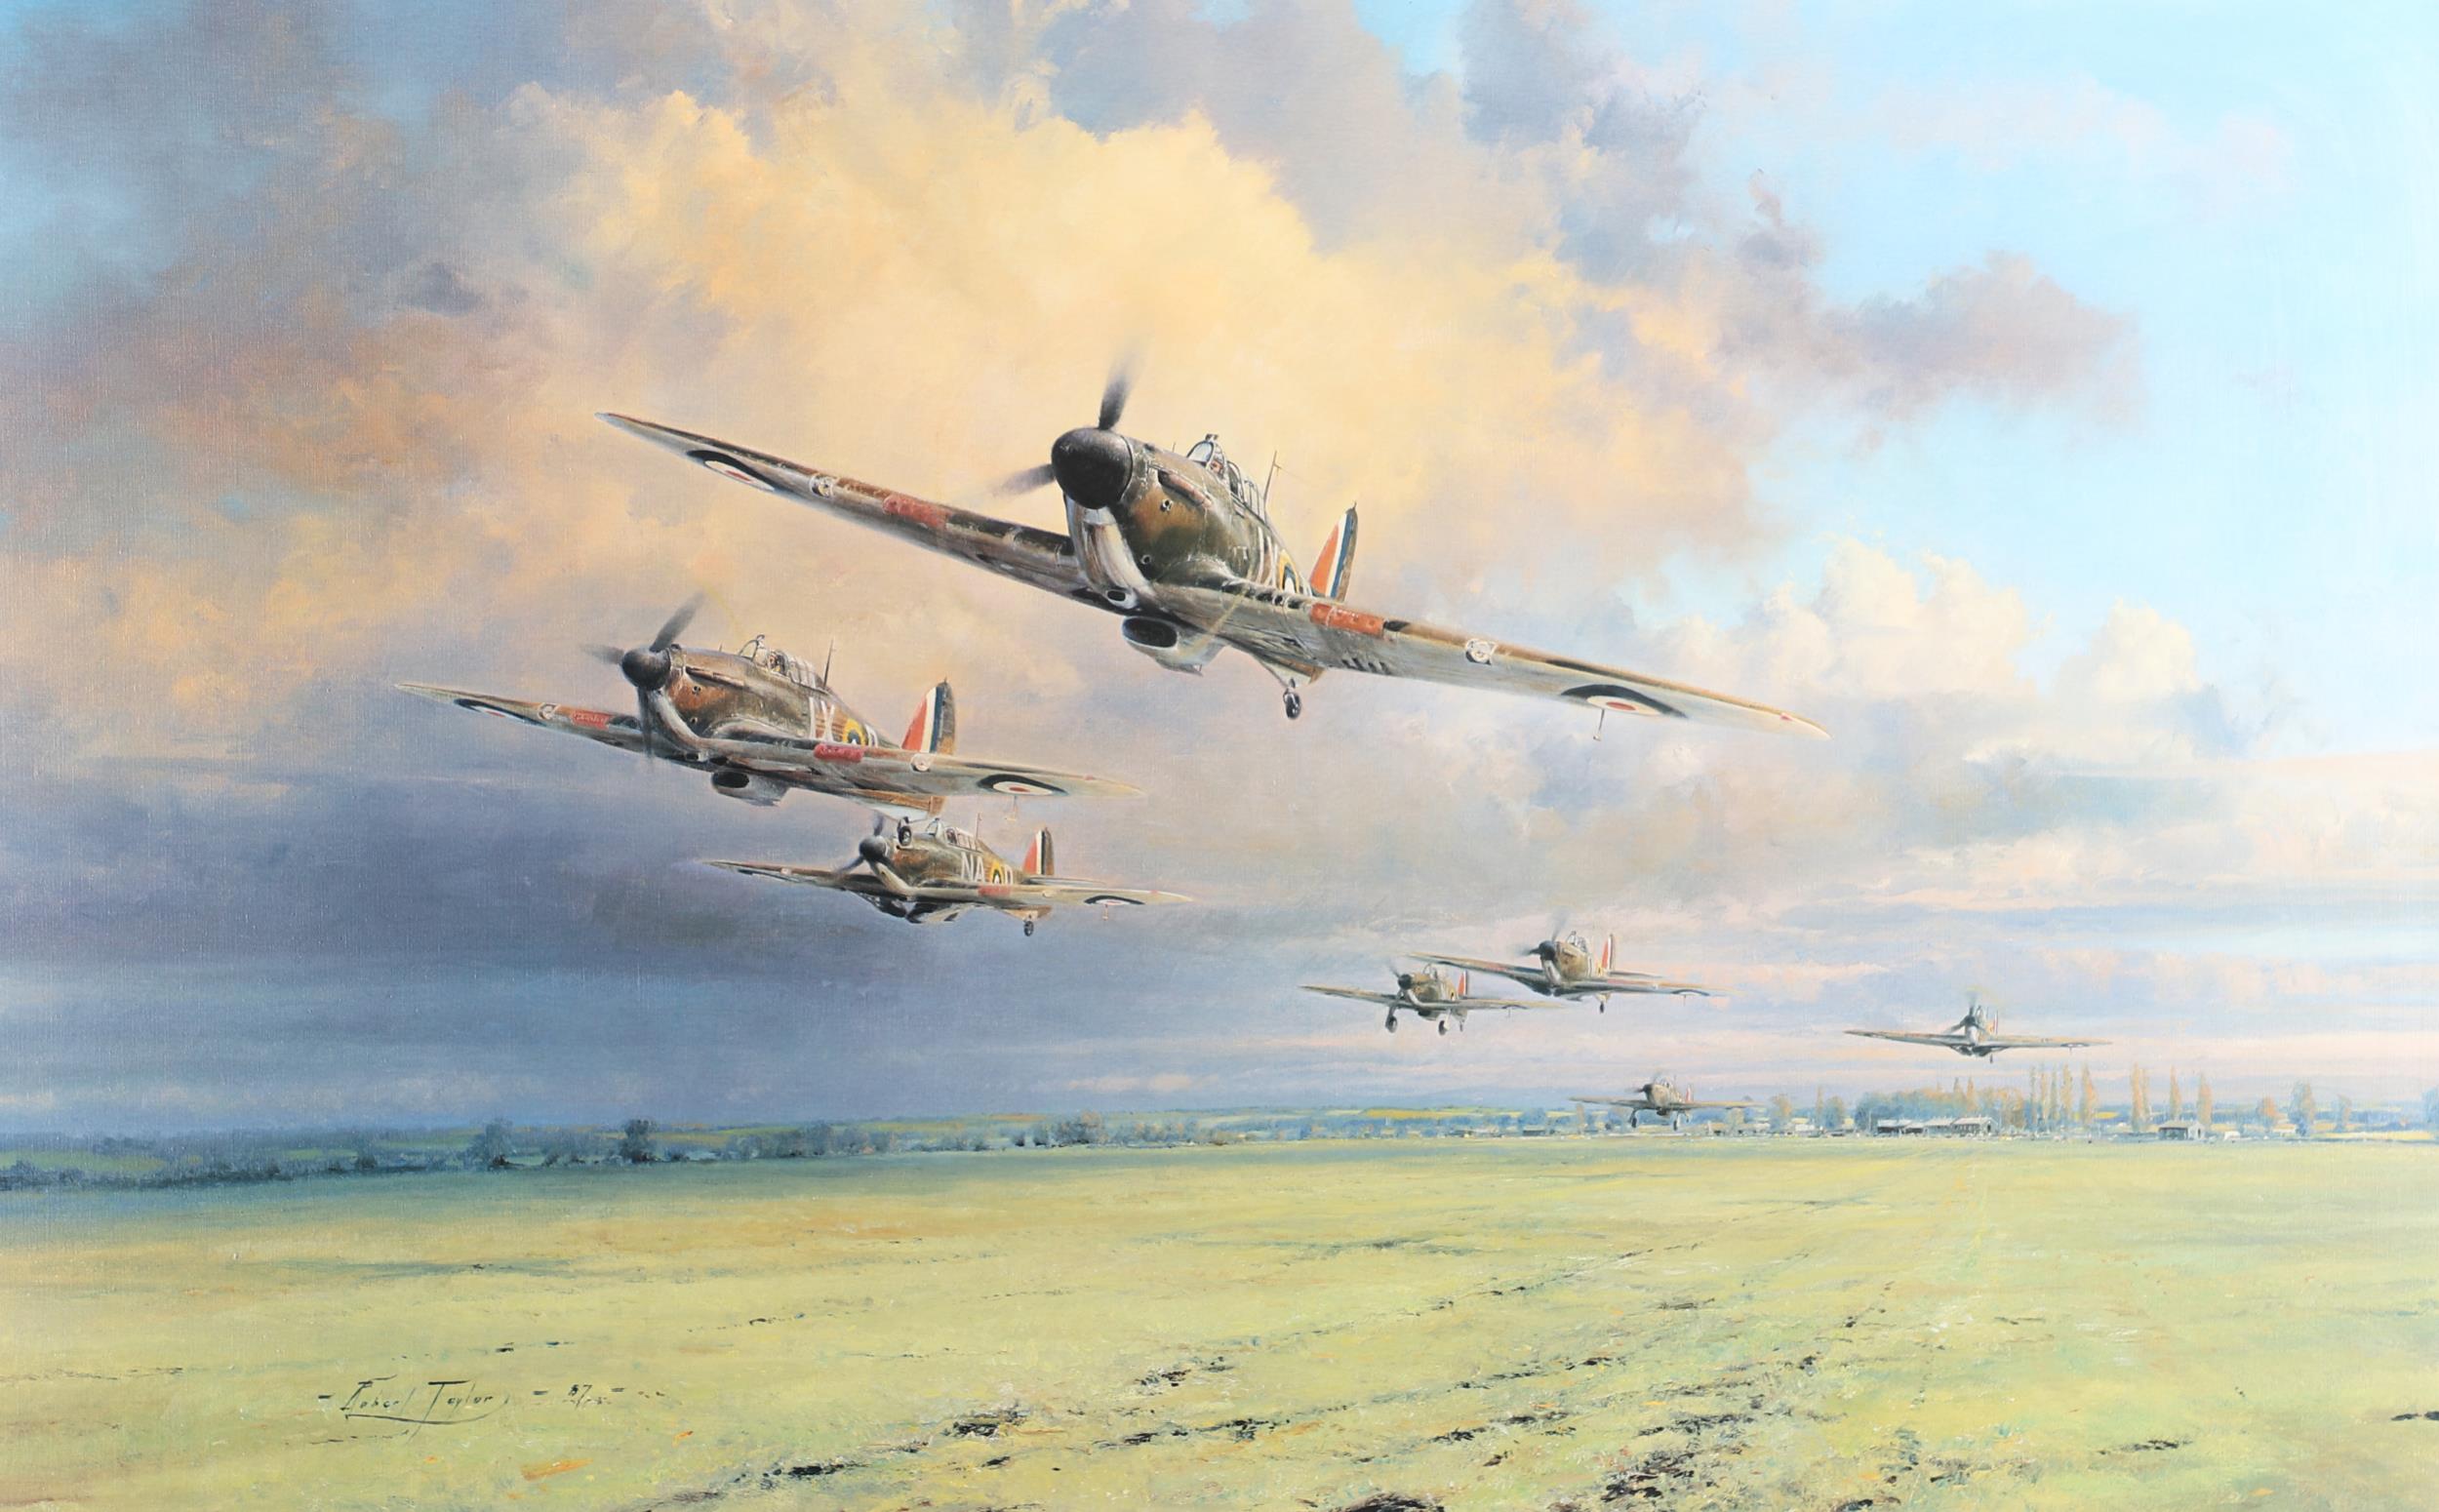 HURRICANE SCRAMBLE BY ROBERT TAYLOR, A COLOUR PRINT WITH PILOT'S SIGNATURES IN THE MARGIN. - Image 2 of 9